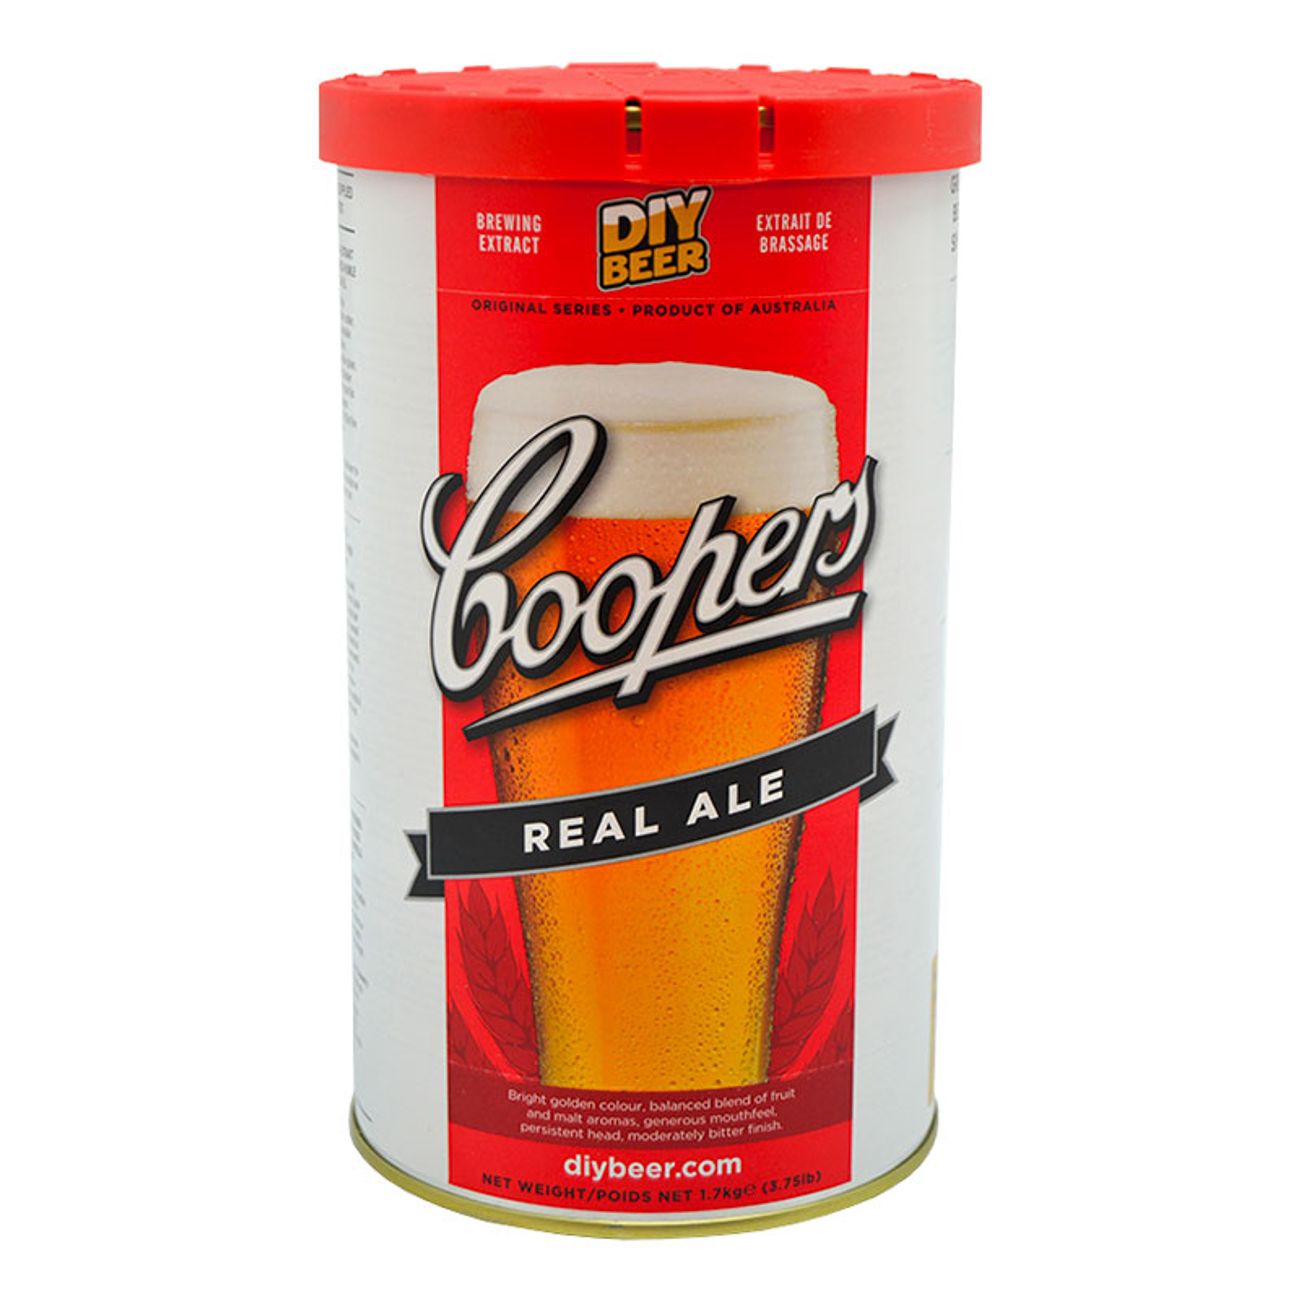 coopers-olsats-real-ale-73340-1